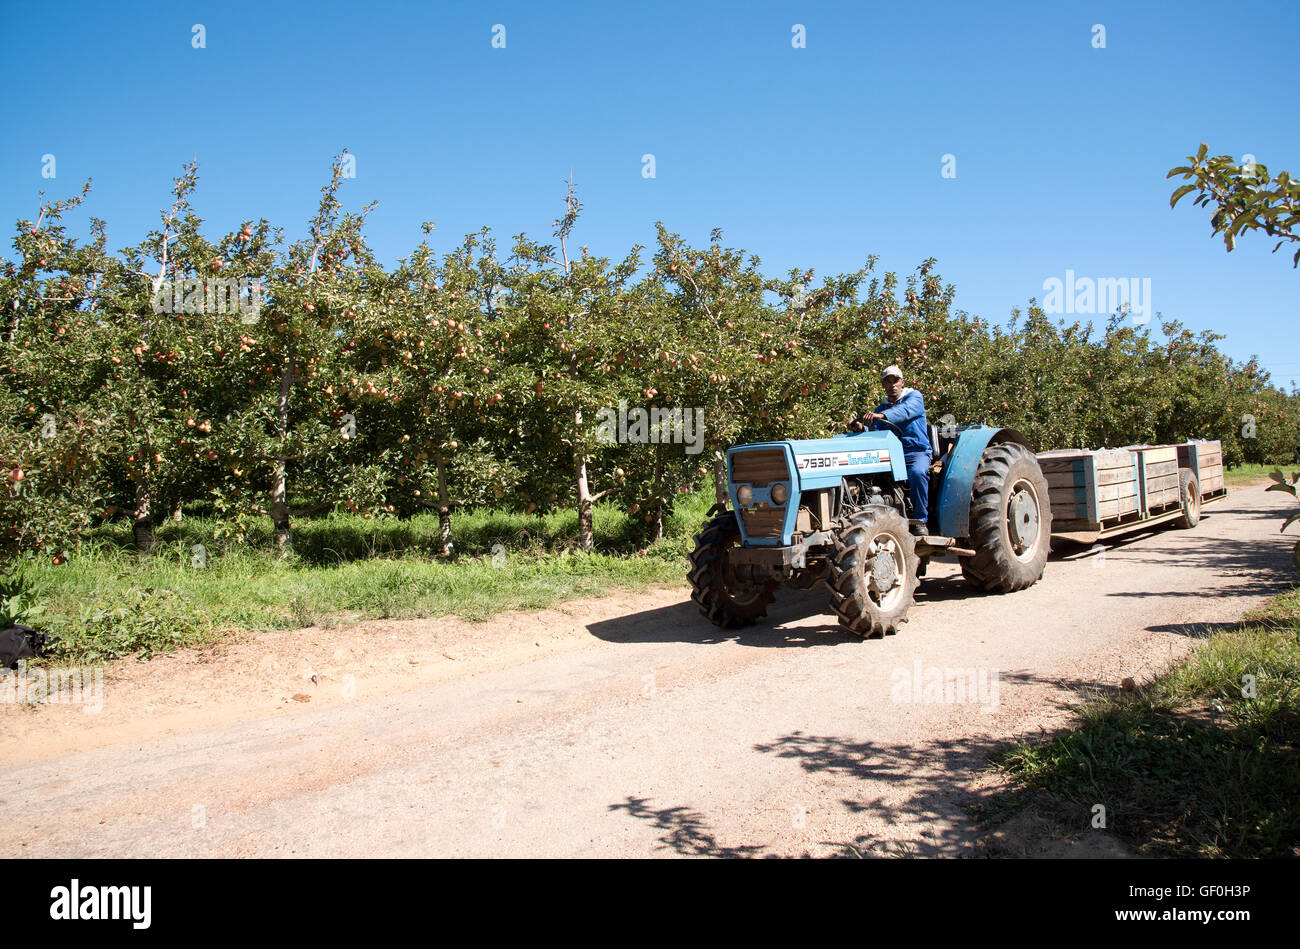 ELGIN WESTERN CAPE SOUTH AFRICA  Tractor driver on an apple farm at Elgin Southern Africa Stock Photo